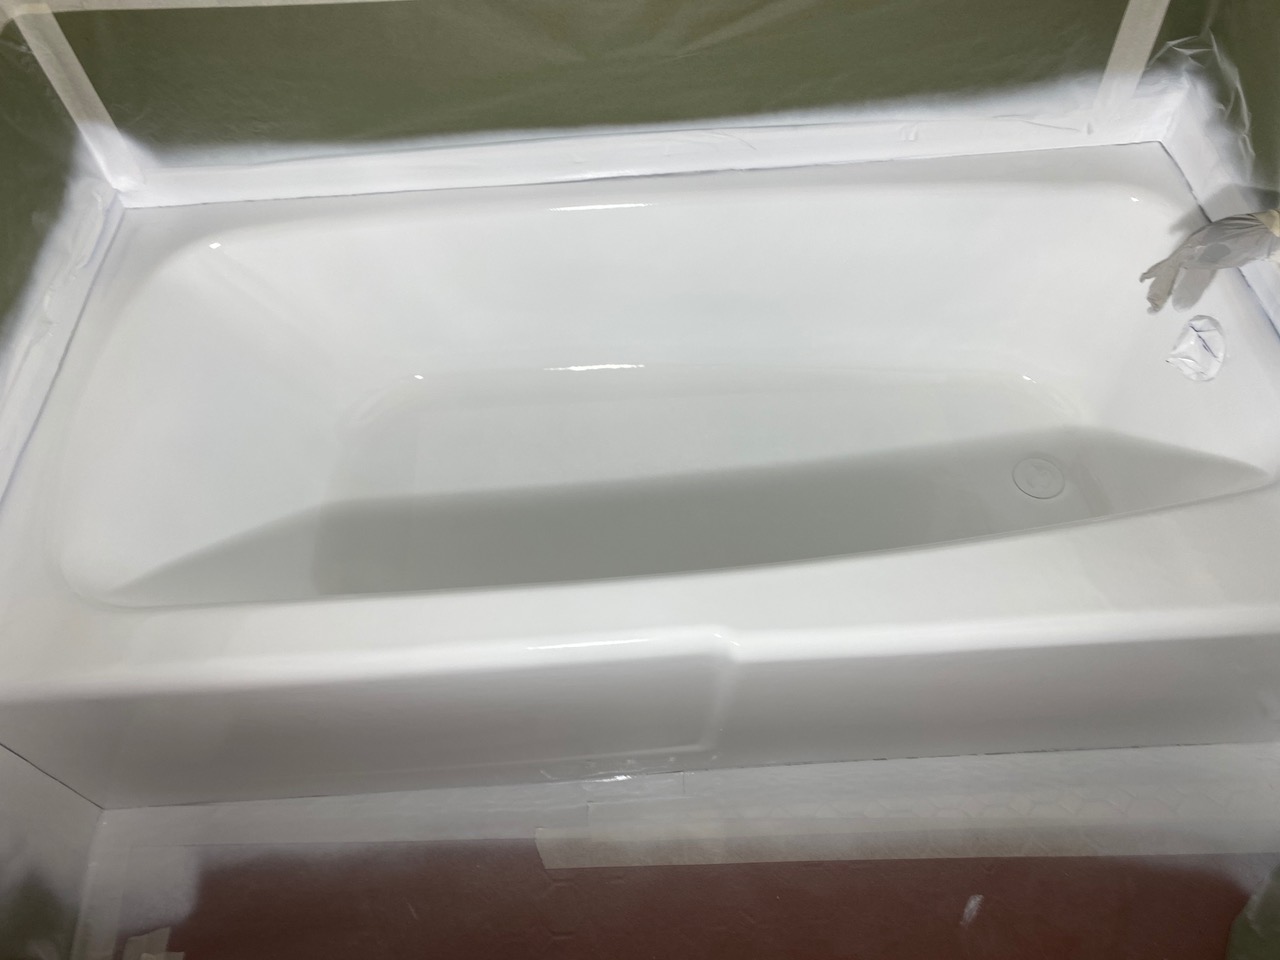 A white bathtub sitting on top of a wooden floor.